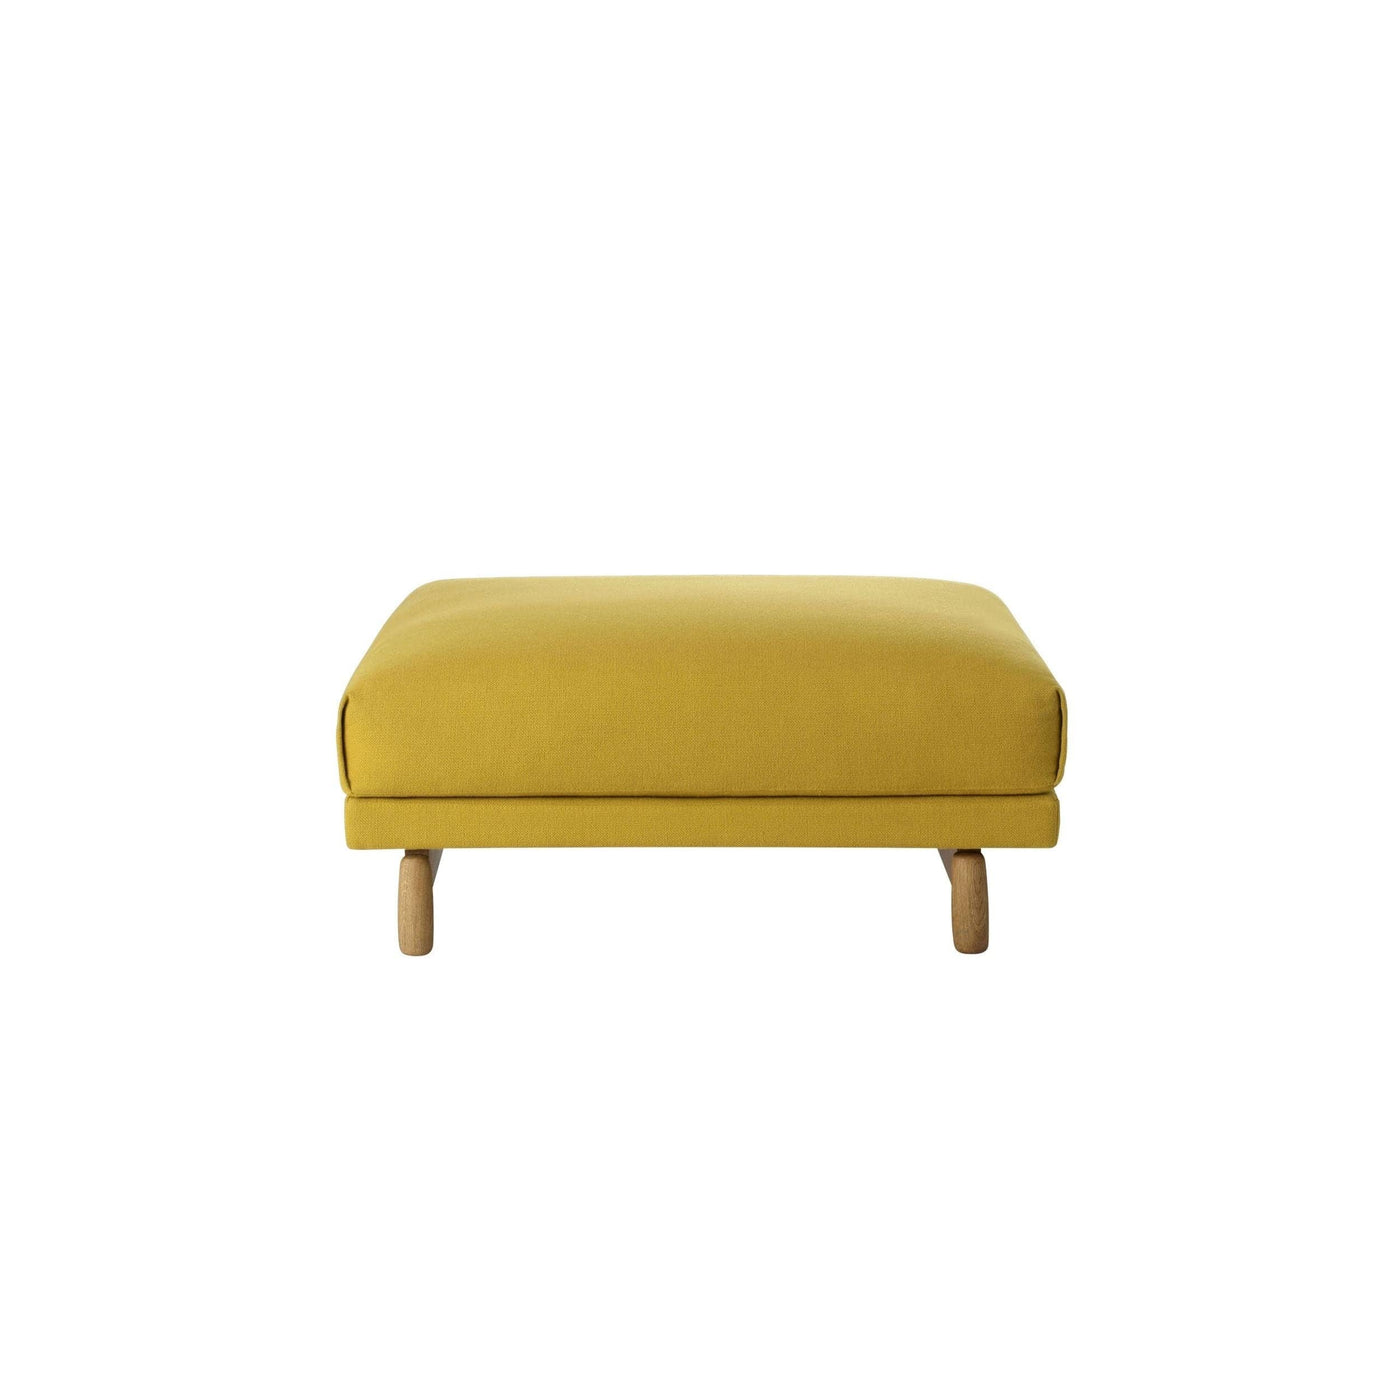 Muuto Rest Pouf in Hallingdal 457 yellow fabric. Made to order from someday designs. #colour_hallingdal-457